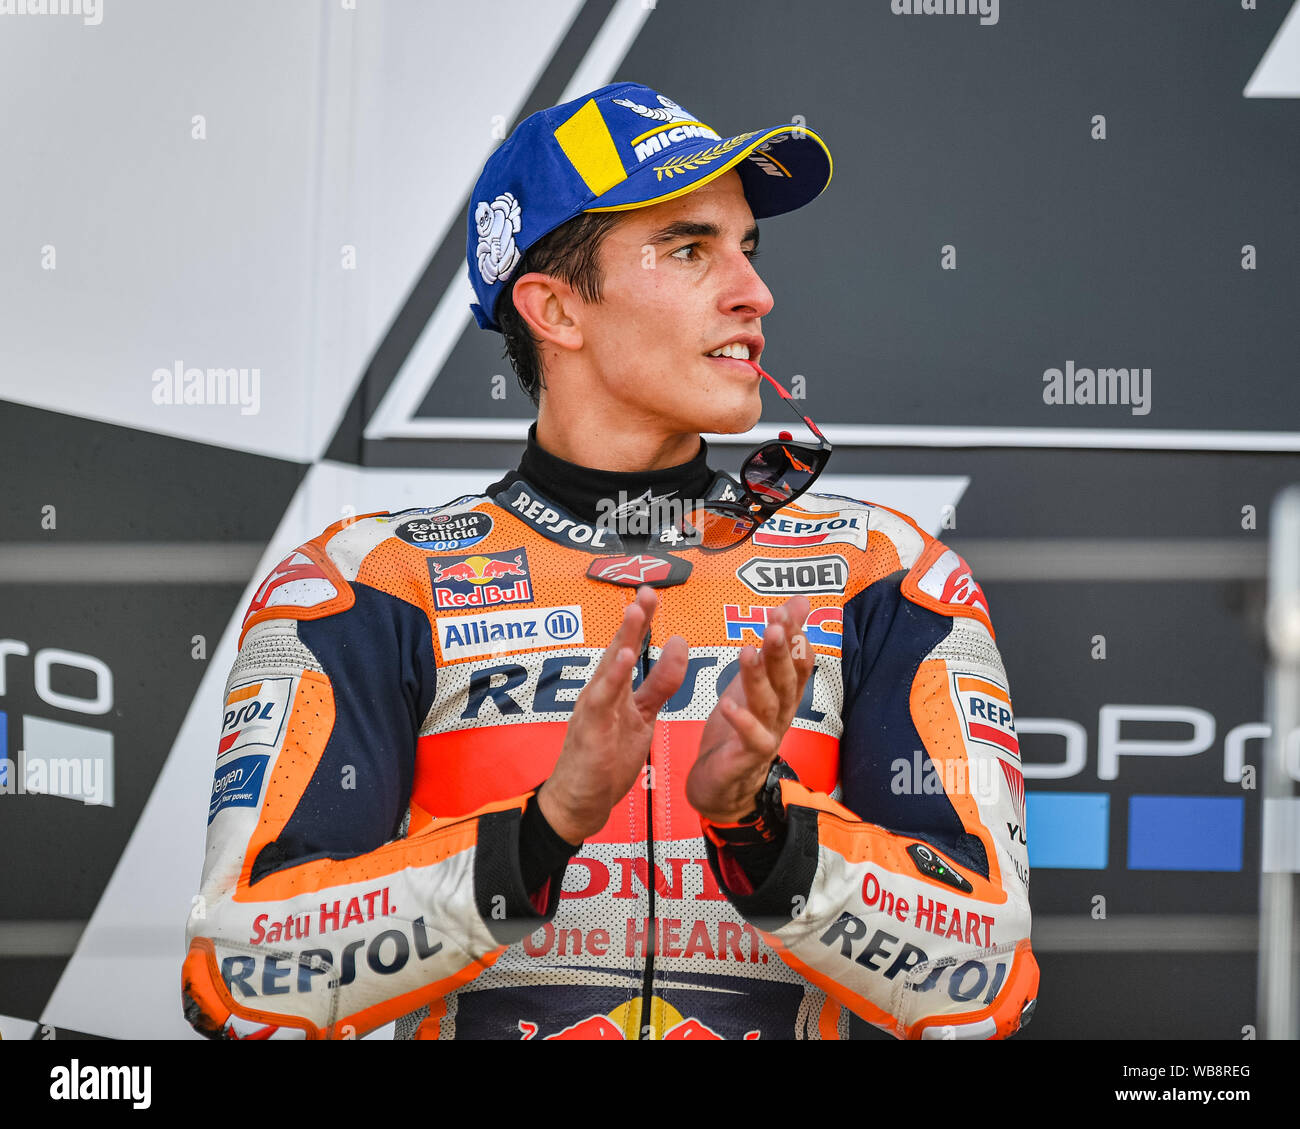 Towcester, UK. 25th Aug, 2019. Marc Marquez (SPA) of Repsol Honda Team at presentation after the Sunday’s Race of  GoPro British Grand Prix at Silverstone Circuit on Sunday, August 25, 2019 in TOWCESTER, ENGLAND. Credit: Taka G Wu/Alamy Live News Stock Photo